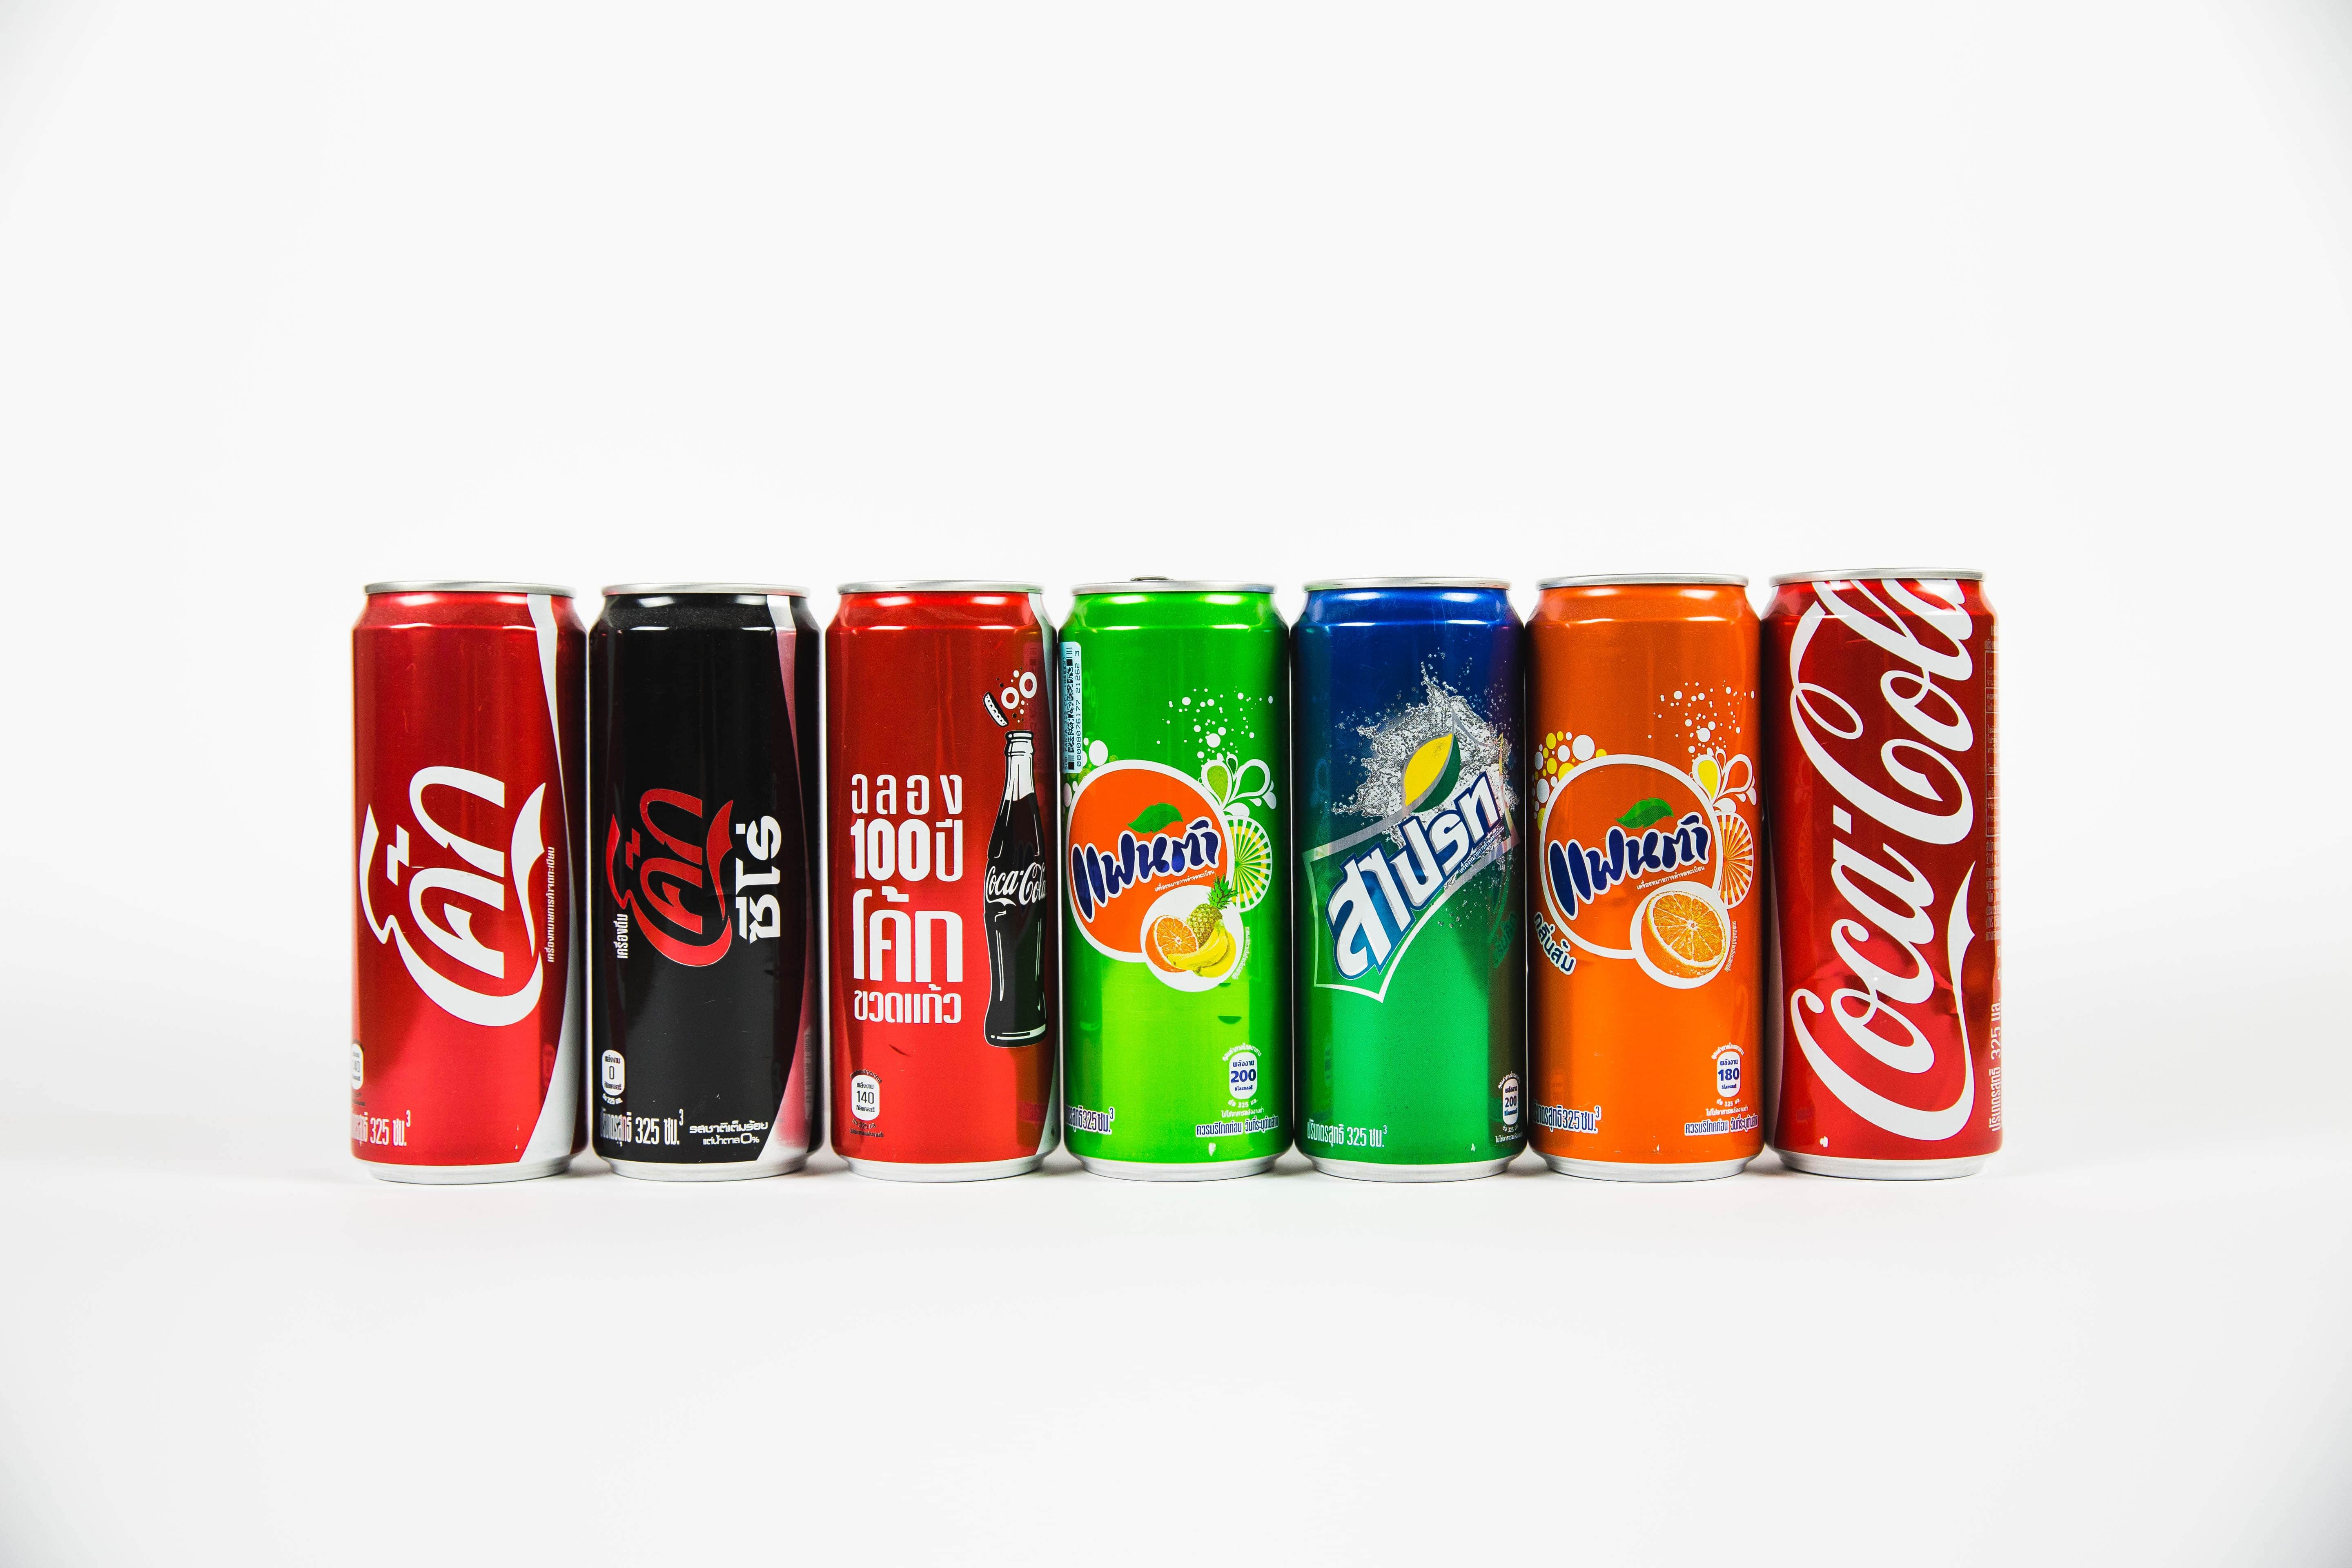 Market research: The soft drink market in China | Daxue Consulting